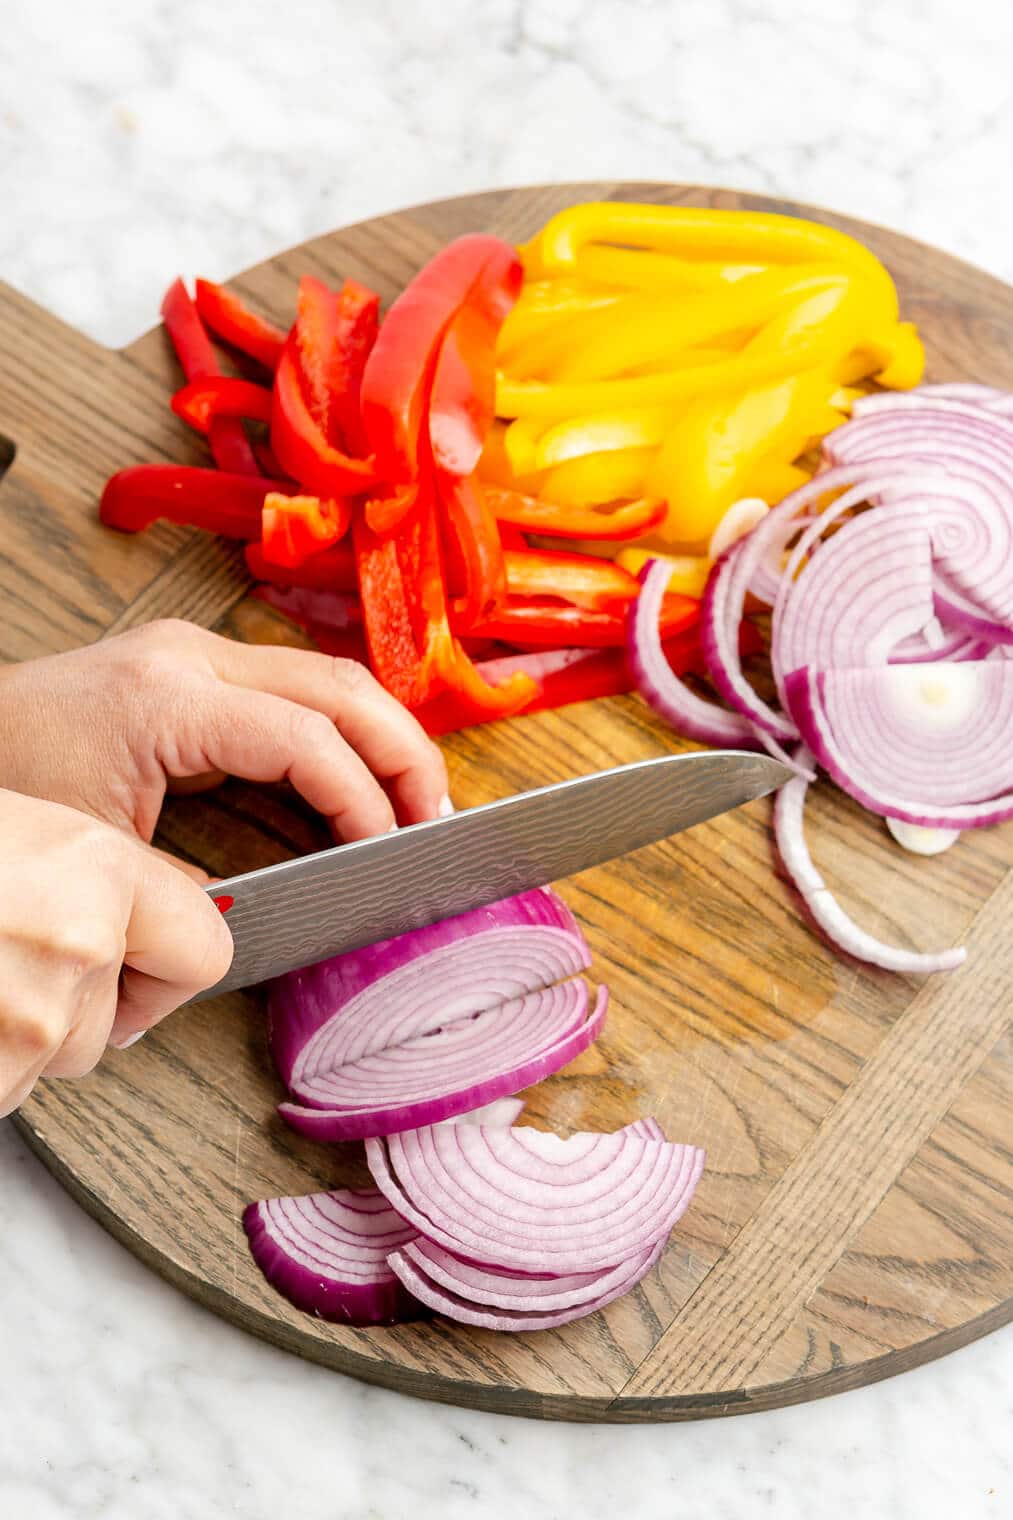 A person using a large knife to slice a red onion on a wood cutting board. Also on the cutting board: sliced yellow and red bell peppers.